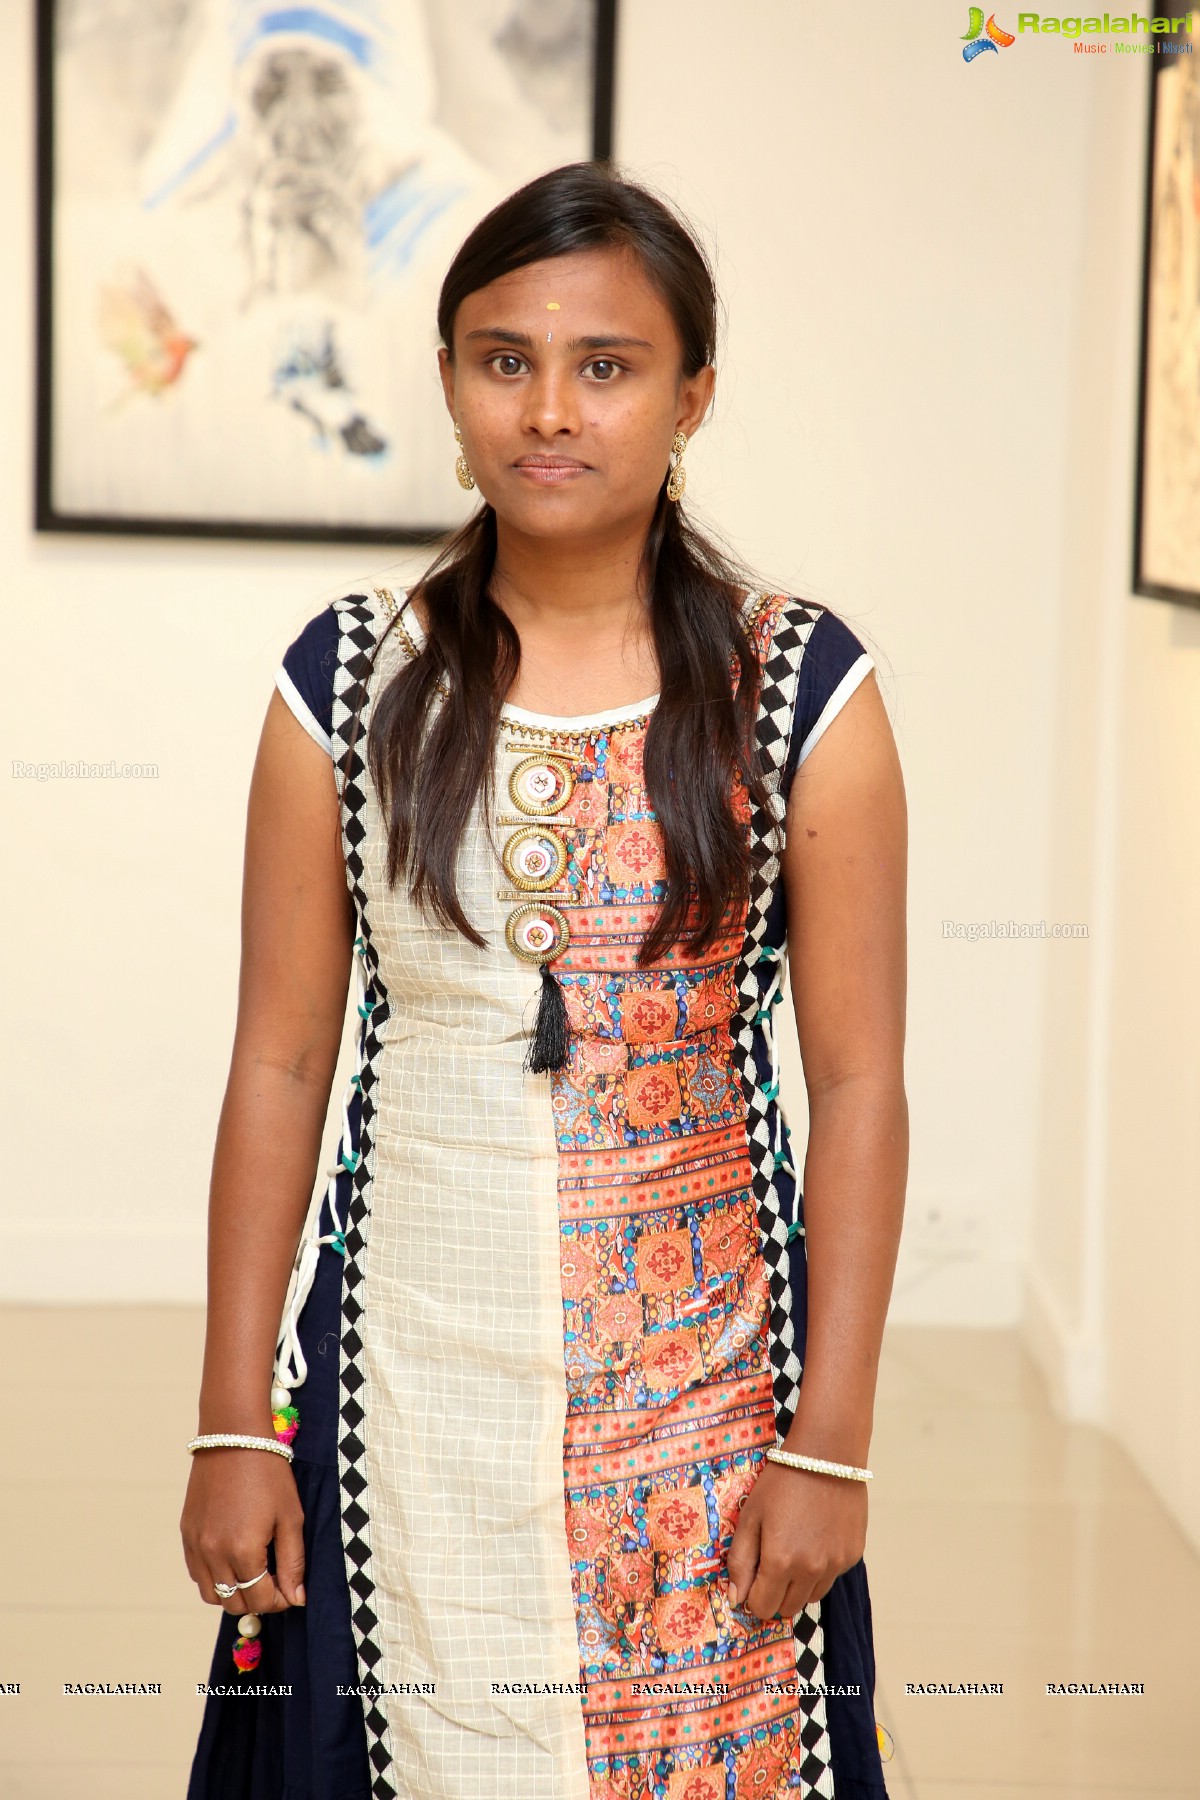 State Art Gallery - Solo Exhibition of Paintings by Swetha G